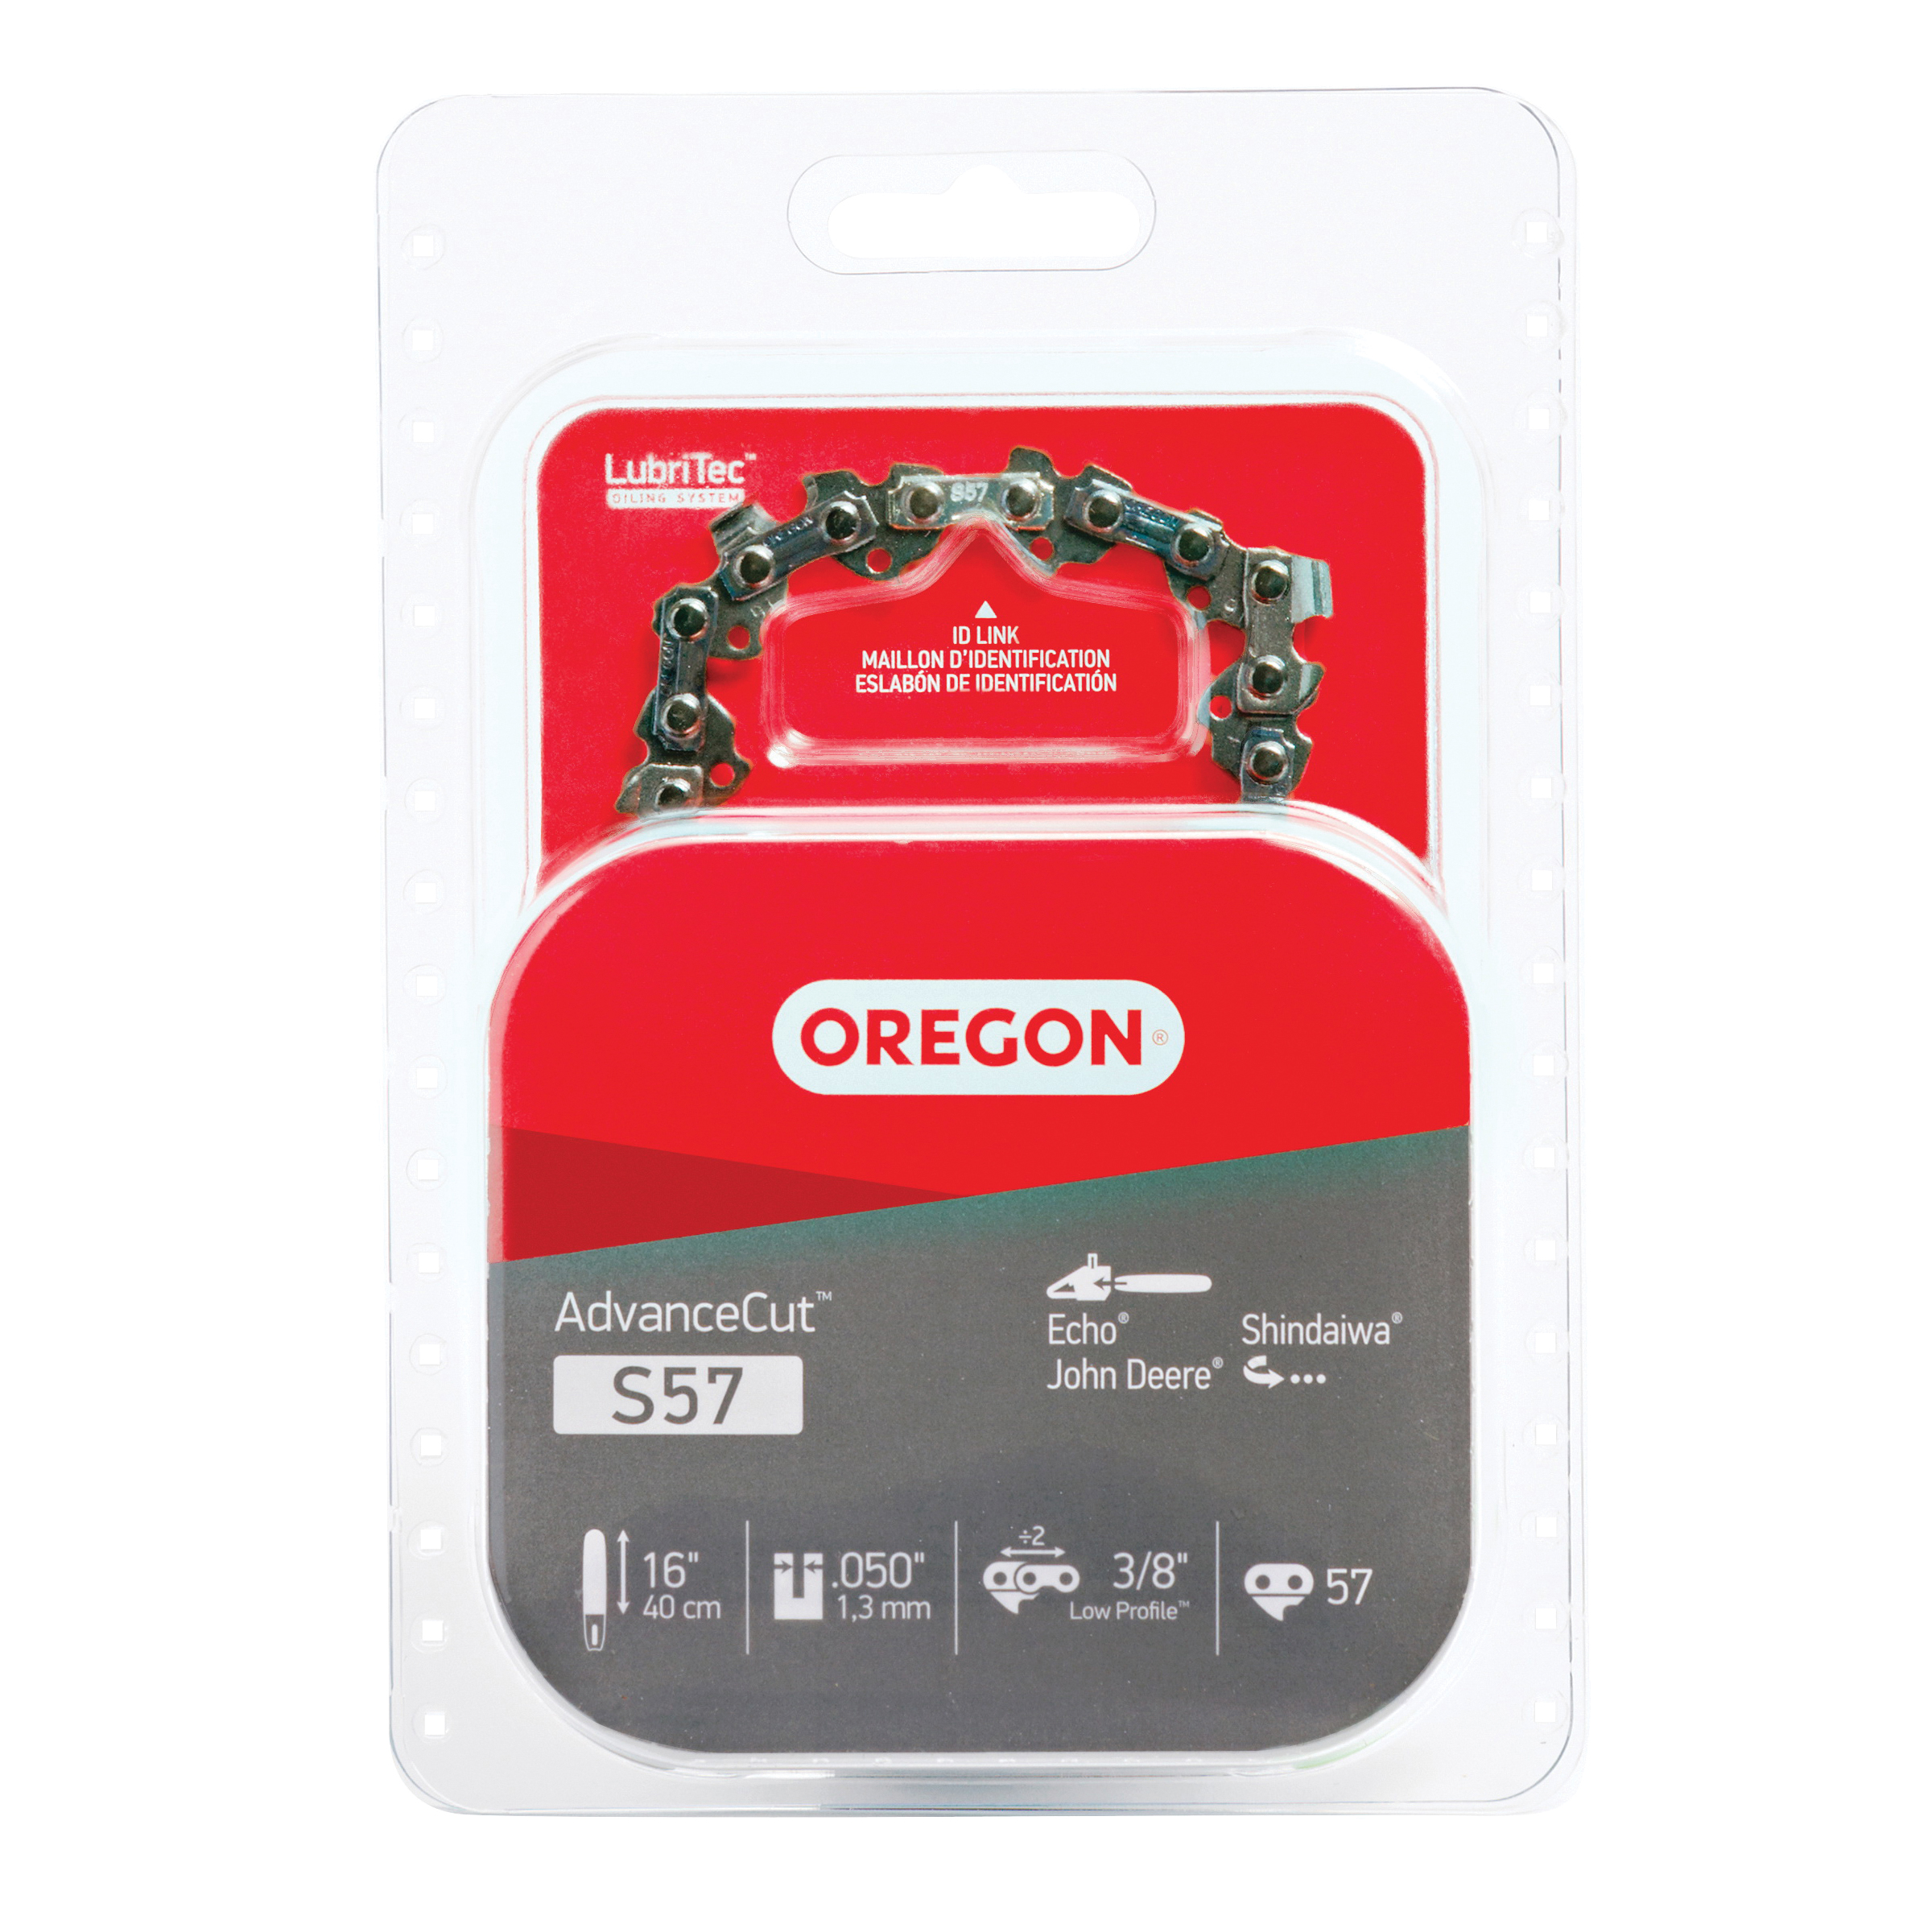 S57 Chainsaw Chain, 16 in L Bar, 0.05 Gauge, 3/8 in TPI/Pitch, 57-Link